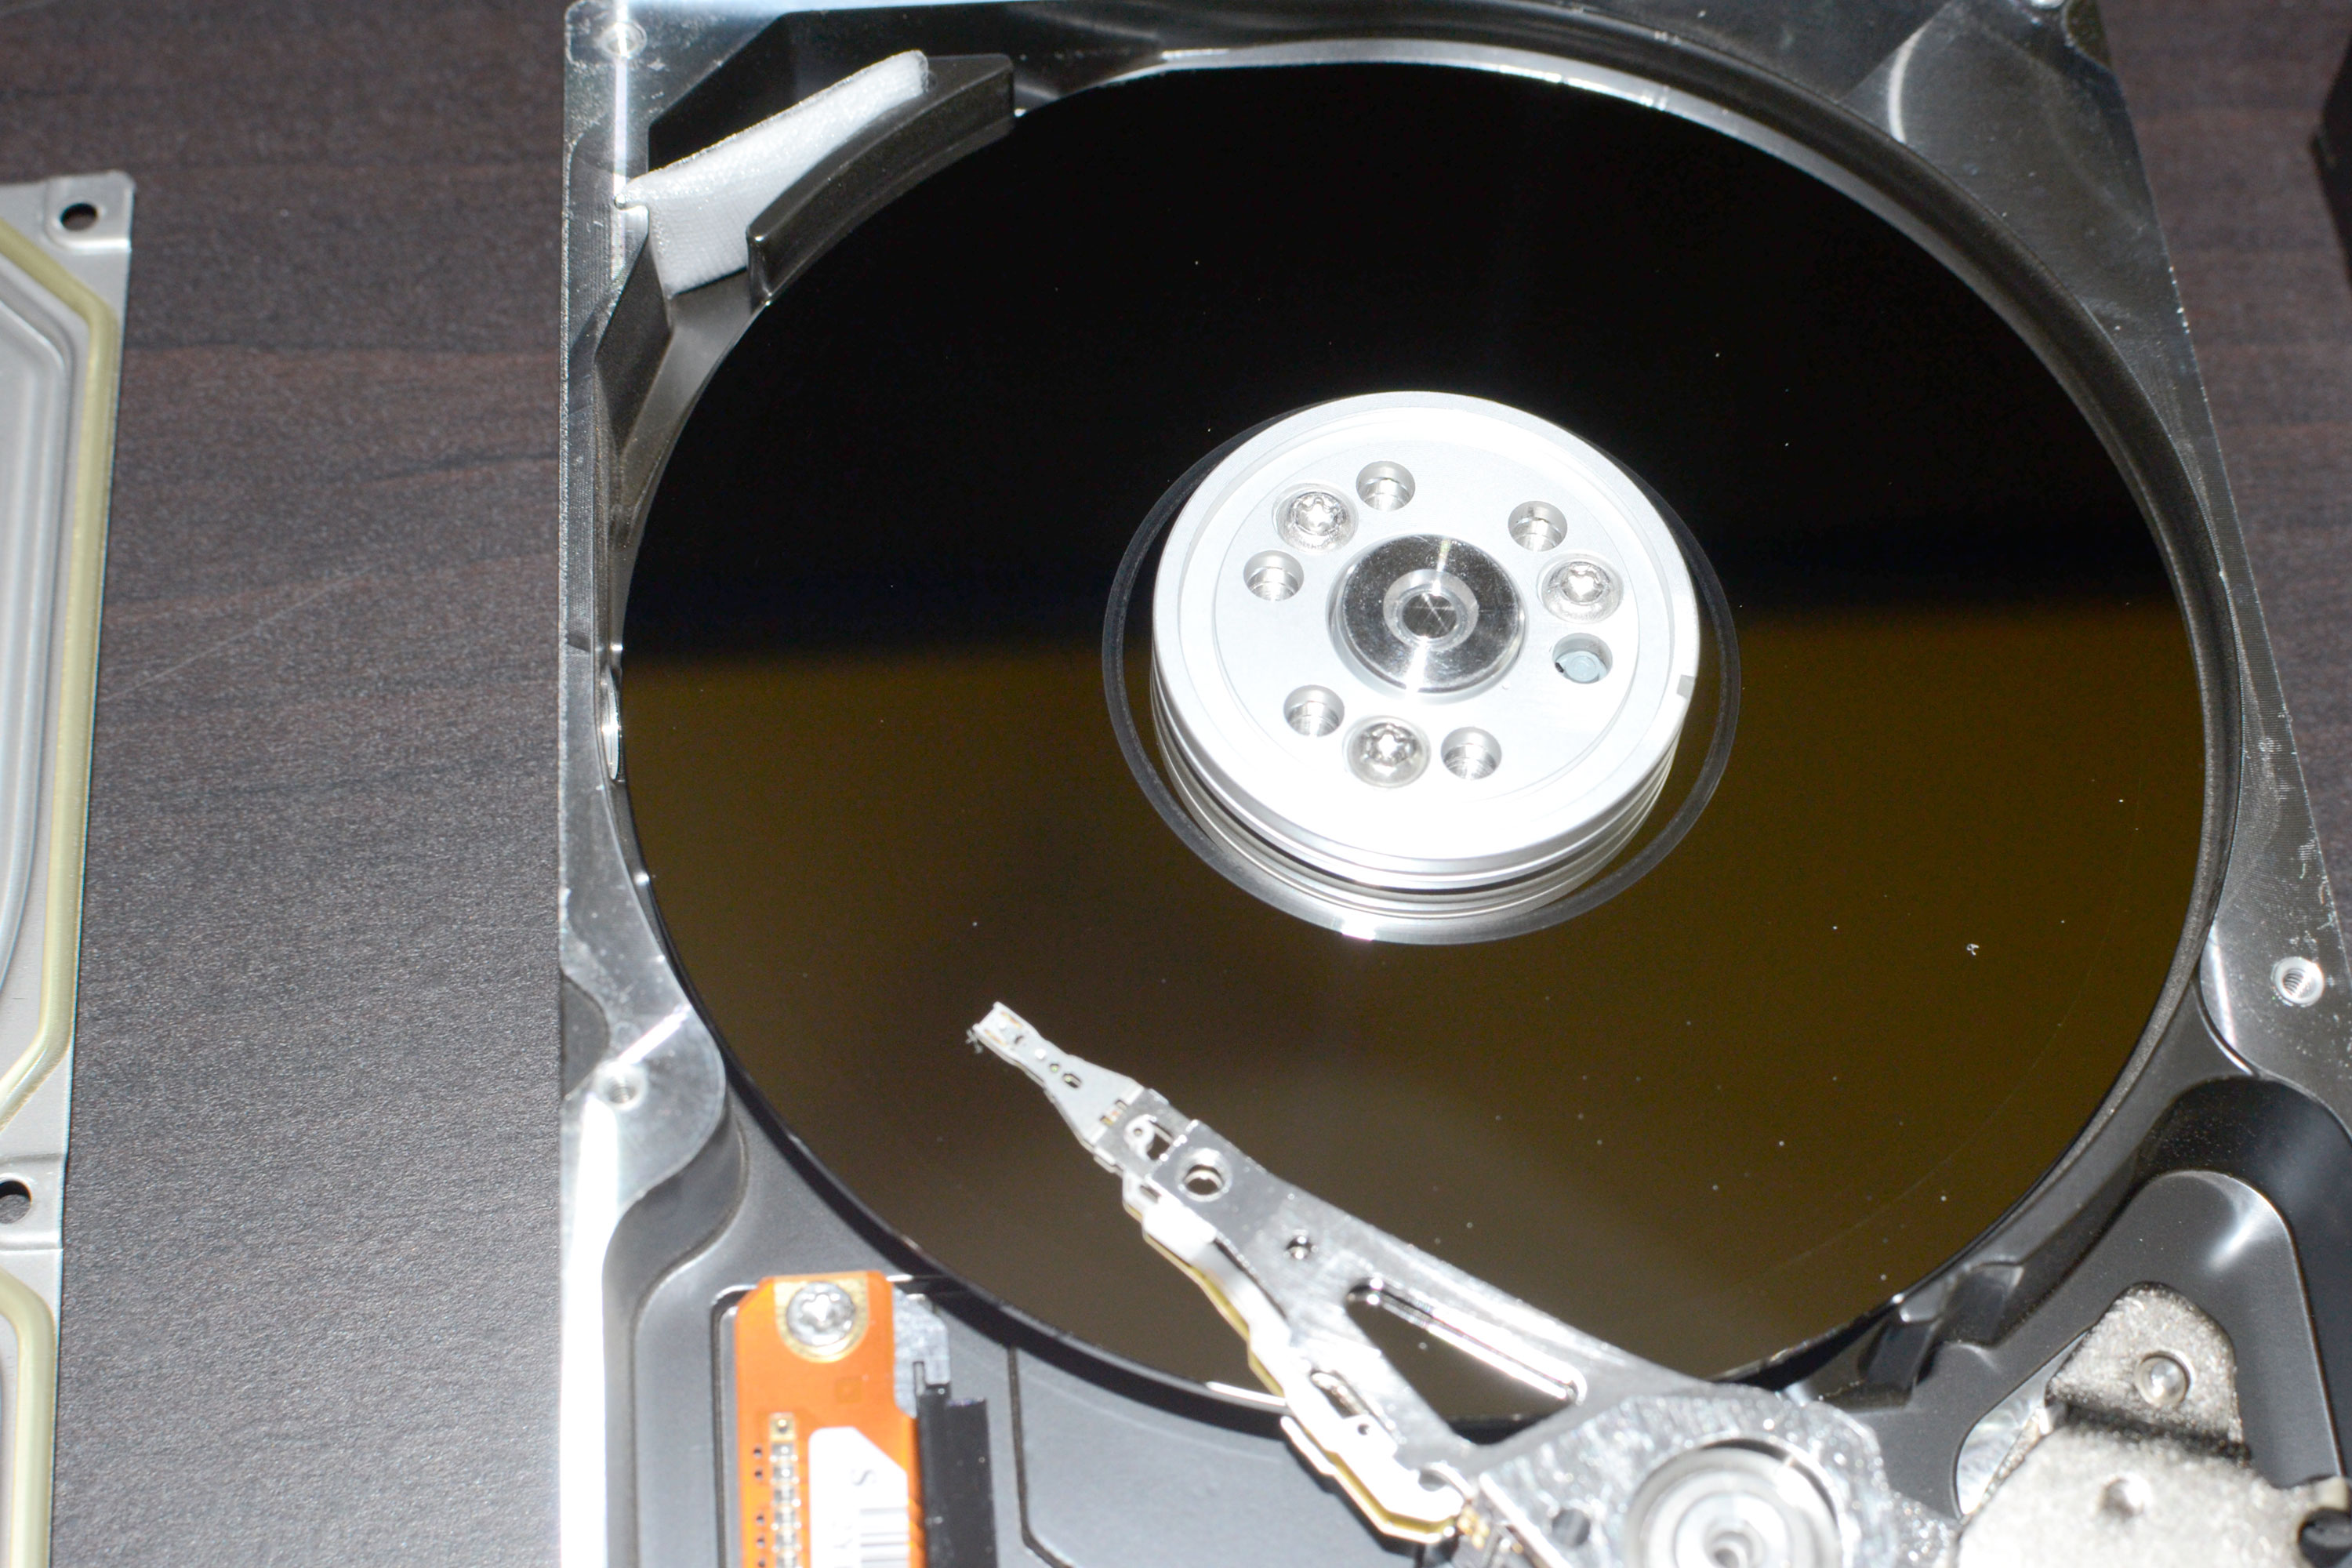 Hardware Tricks: How to Not Fix a Crashed Hard Drive